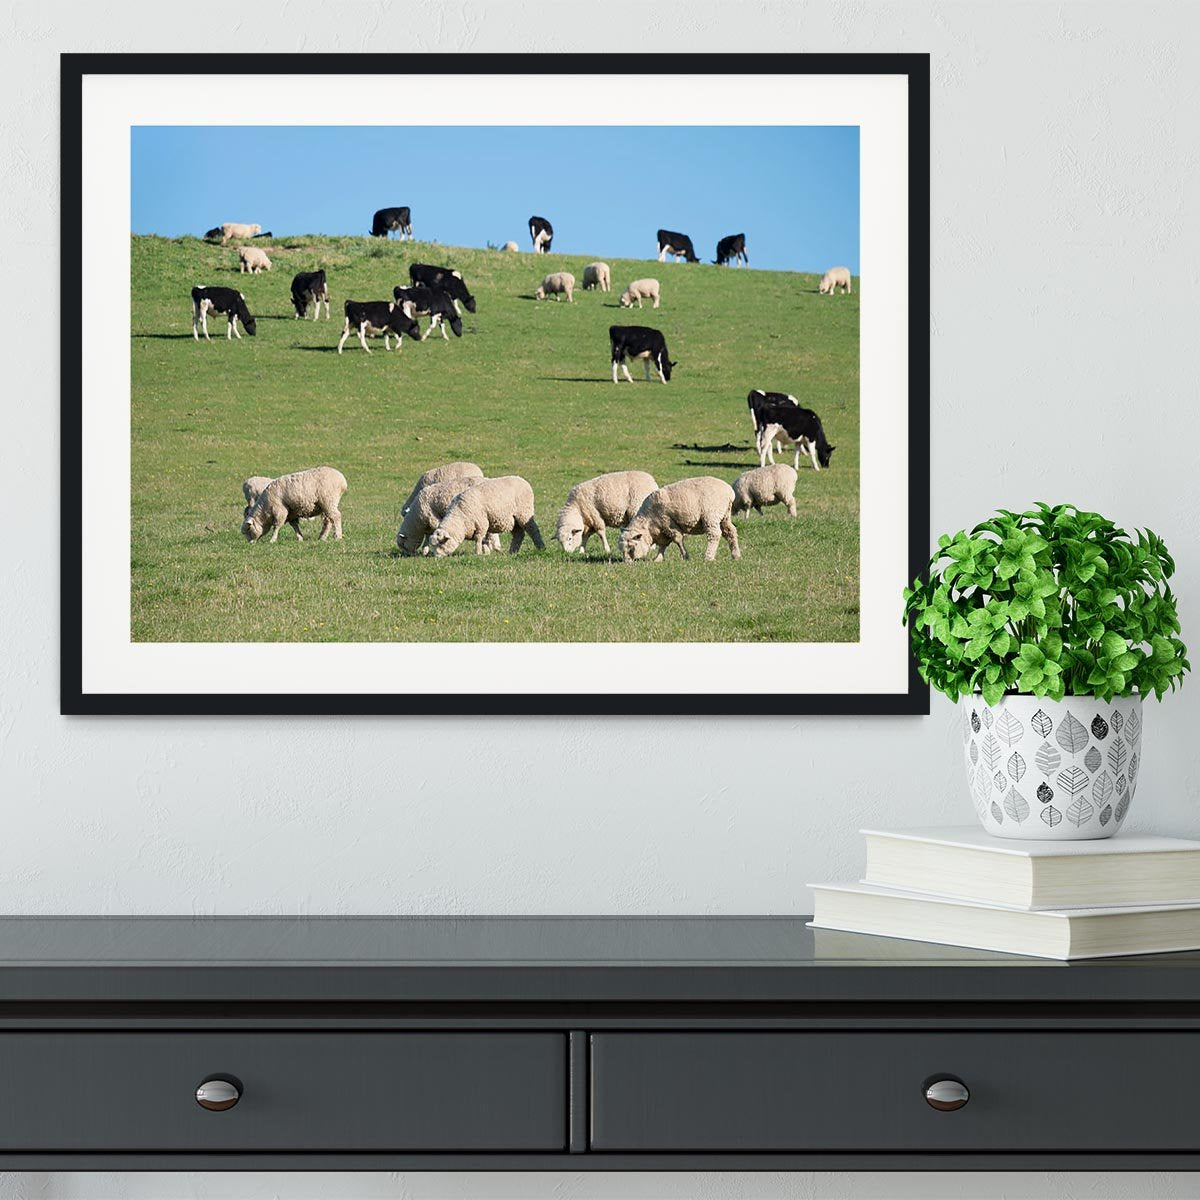 Sheeps in green rural meadow with cows Framed Print - Canvas Art Rocks - 1